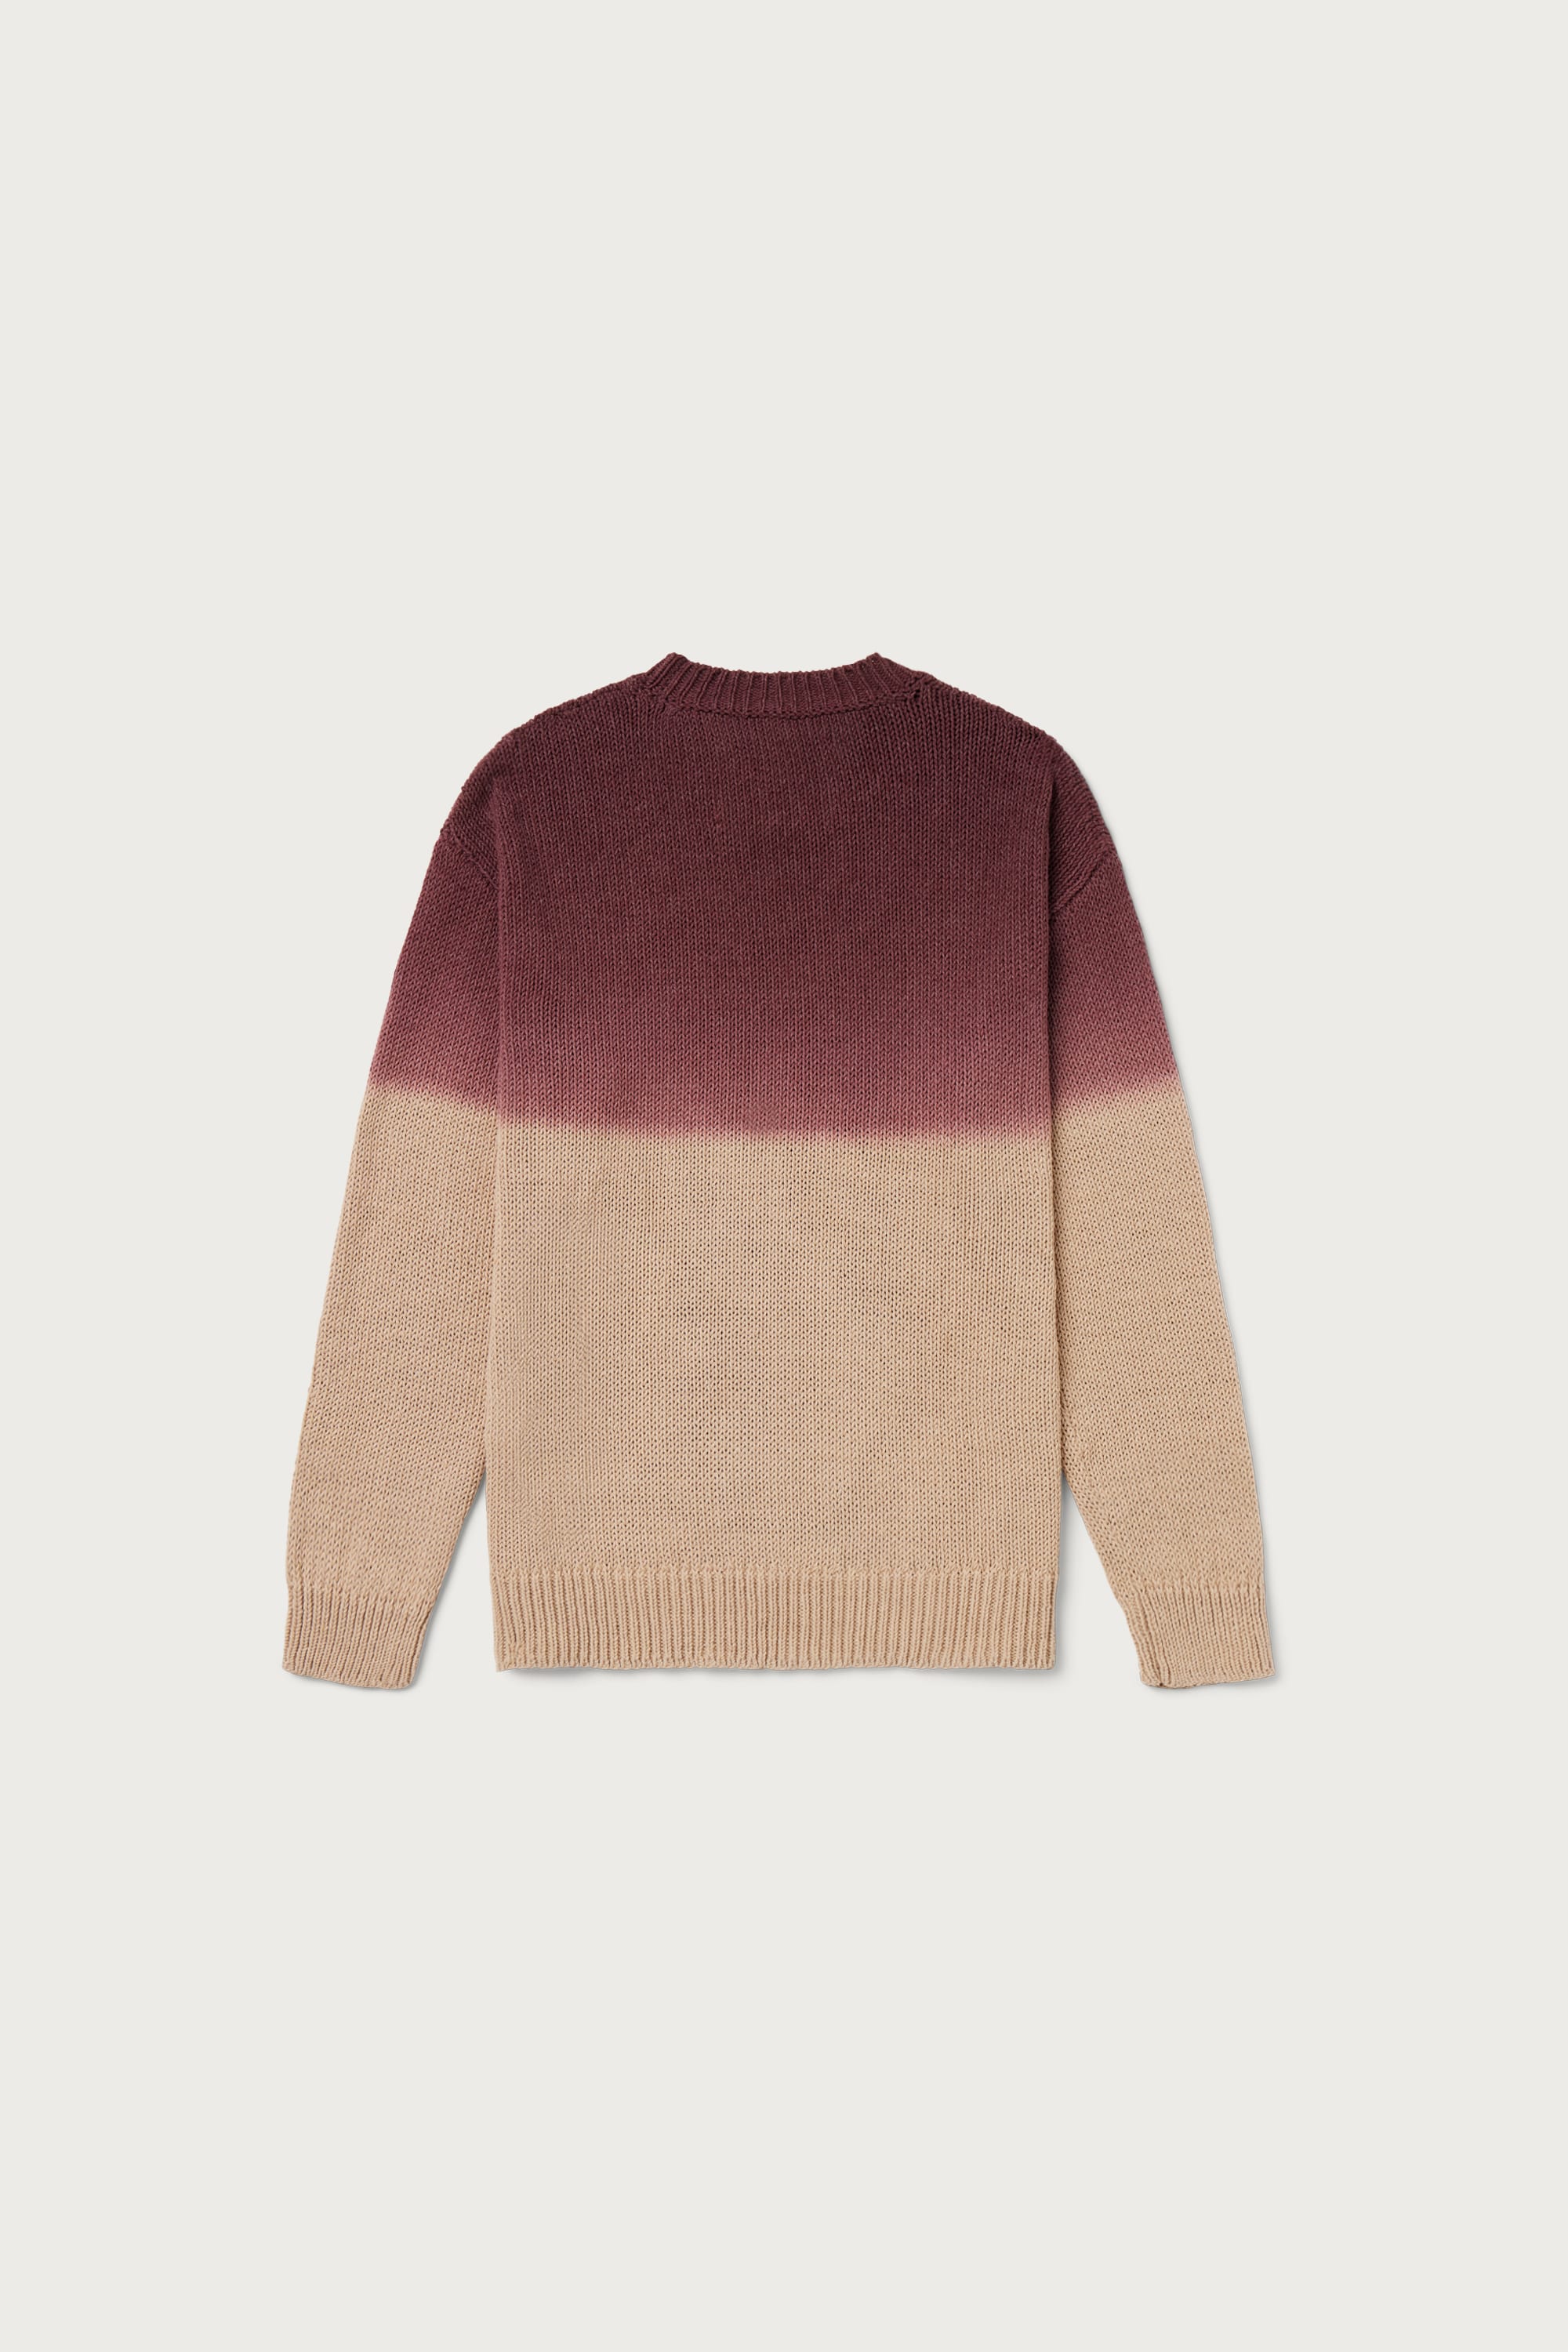 【ONE OF THESE DAYS】KNIT SWEATER